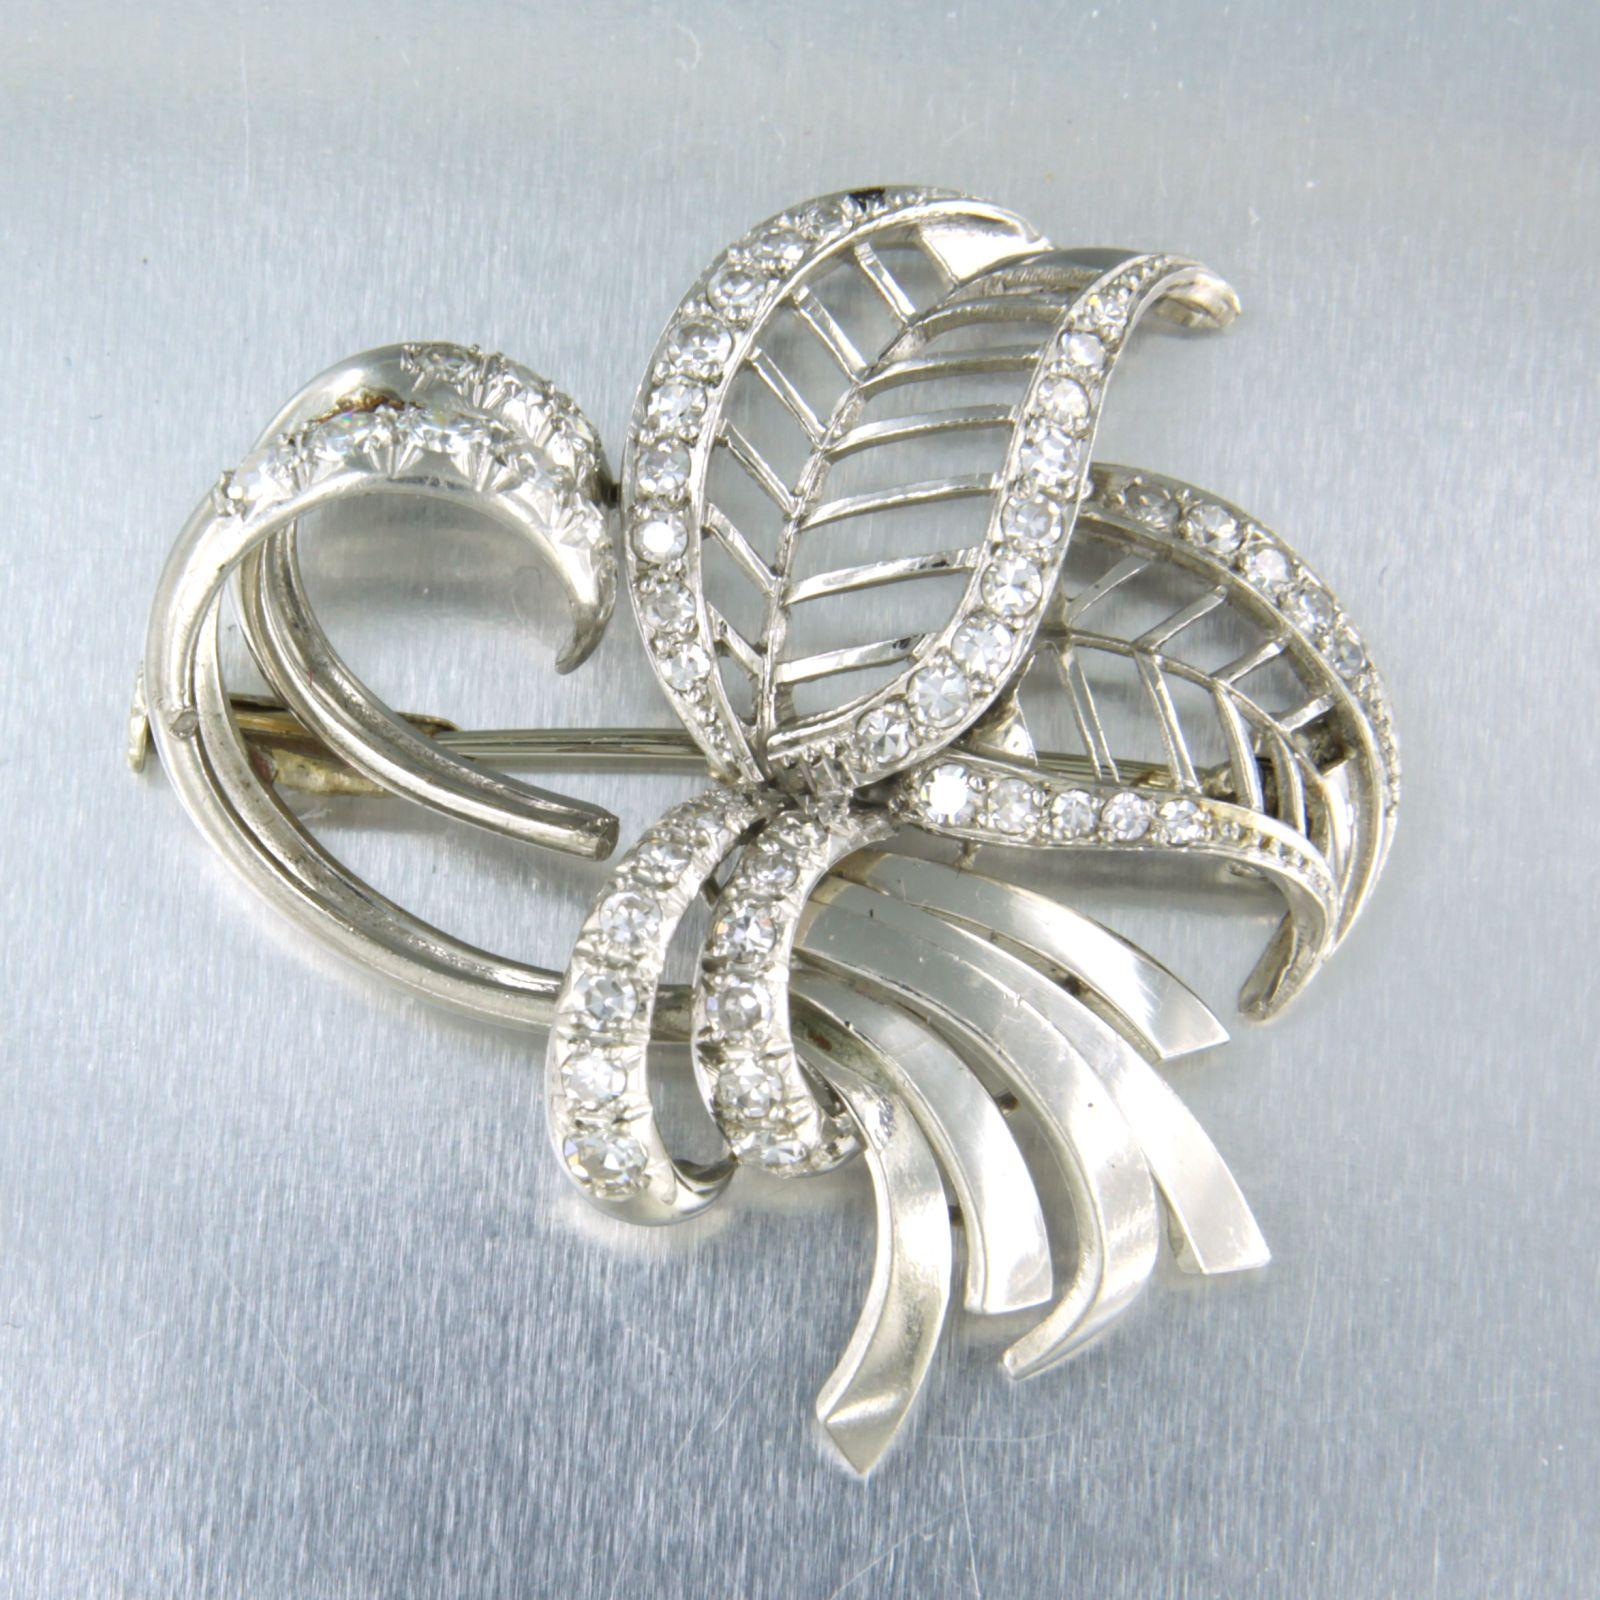 Women's Brooch with diamonds 950 Pt platinum For Sale